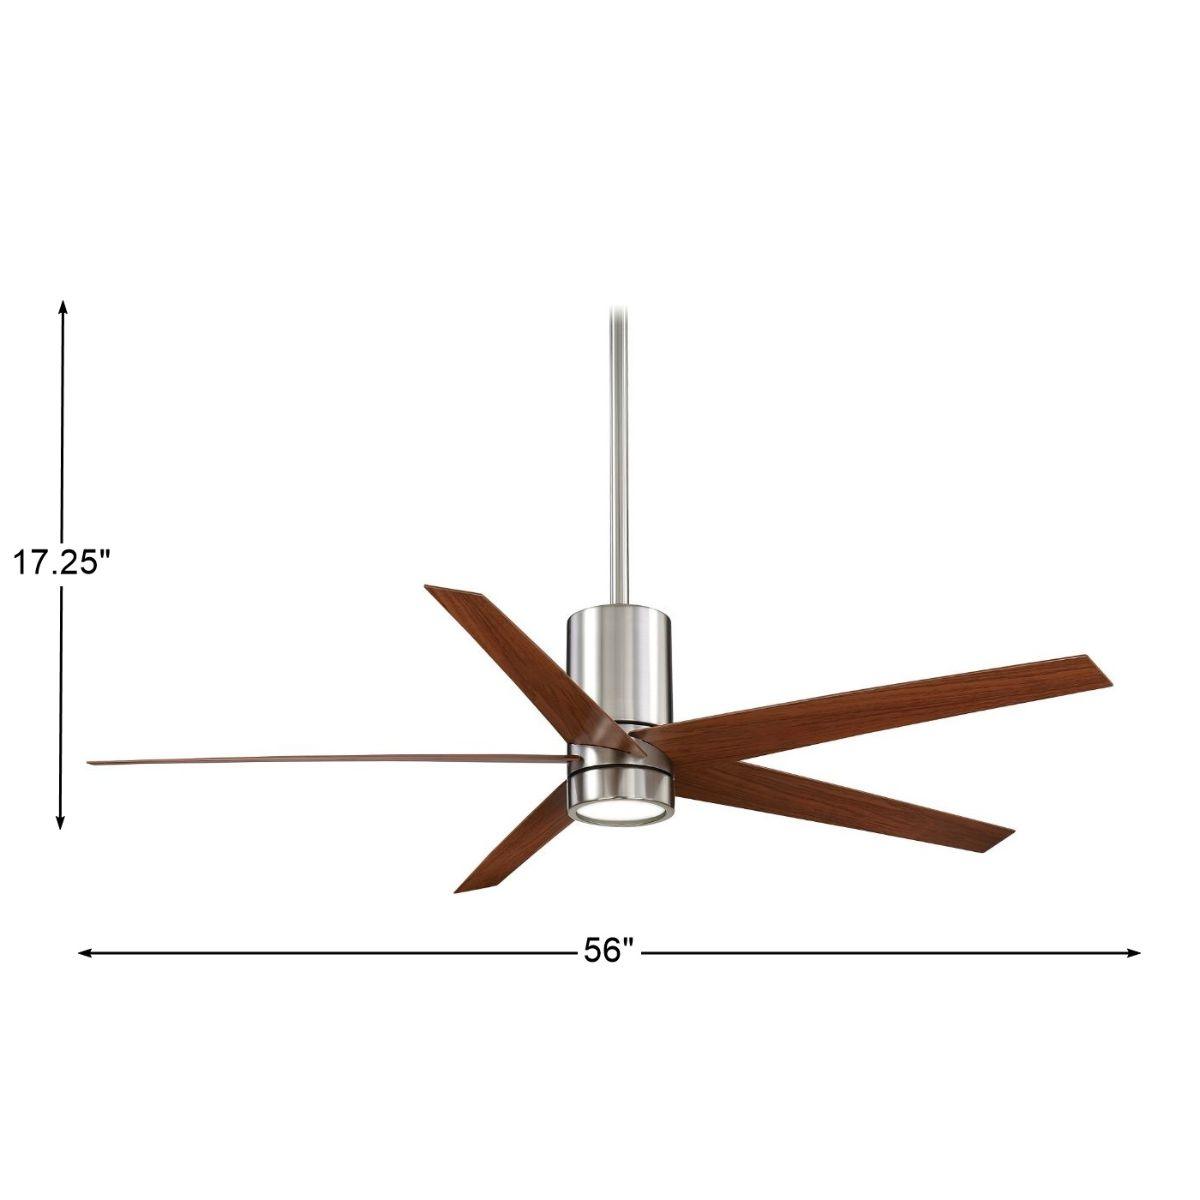 Symbio 56 Inch Modern Ceiling Fan With Light And Remote